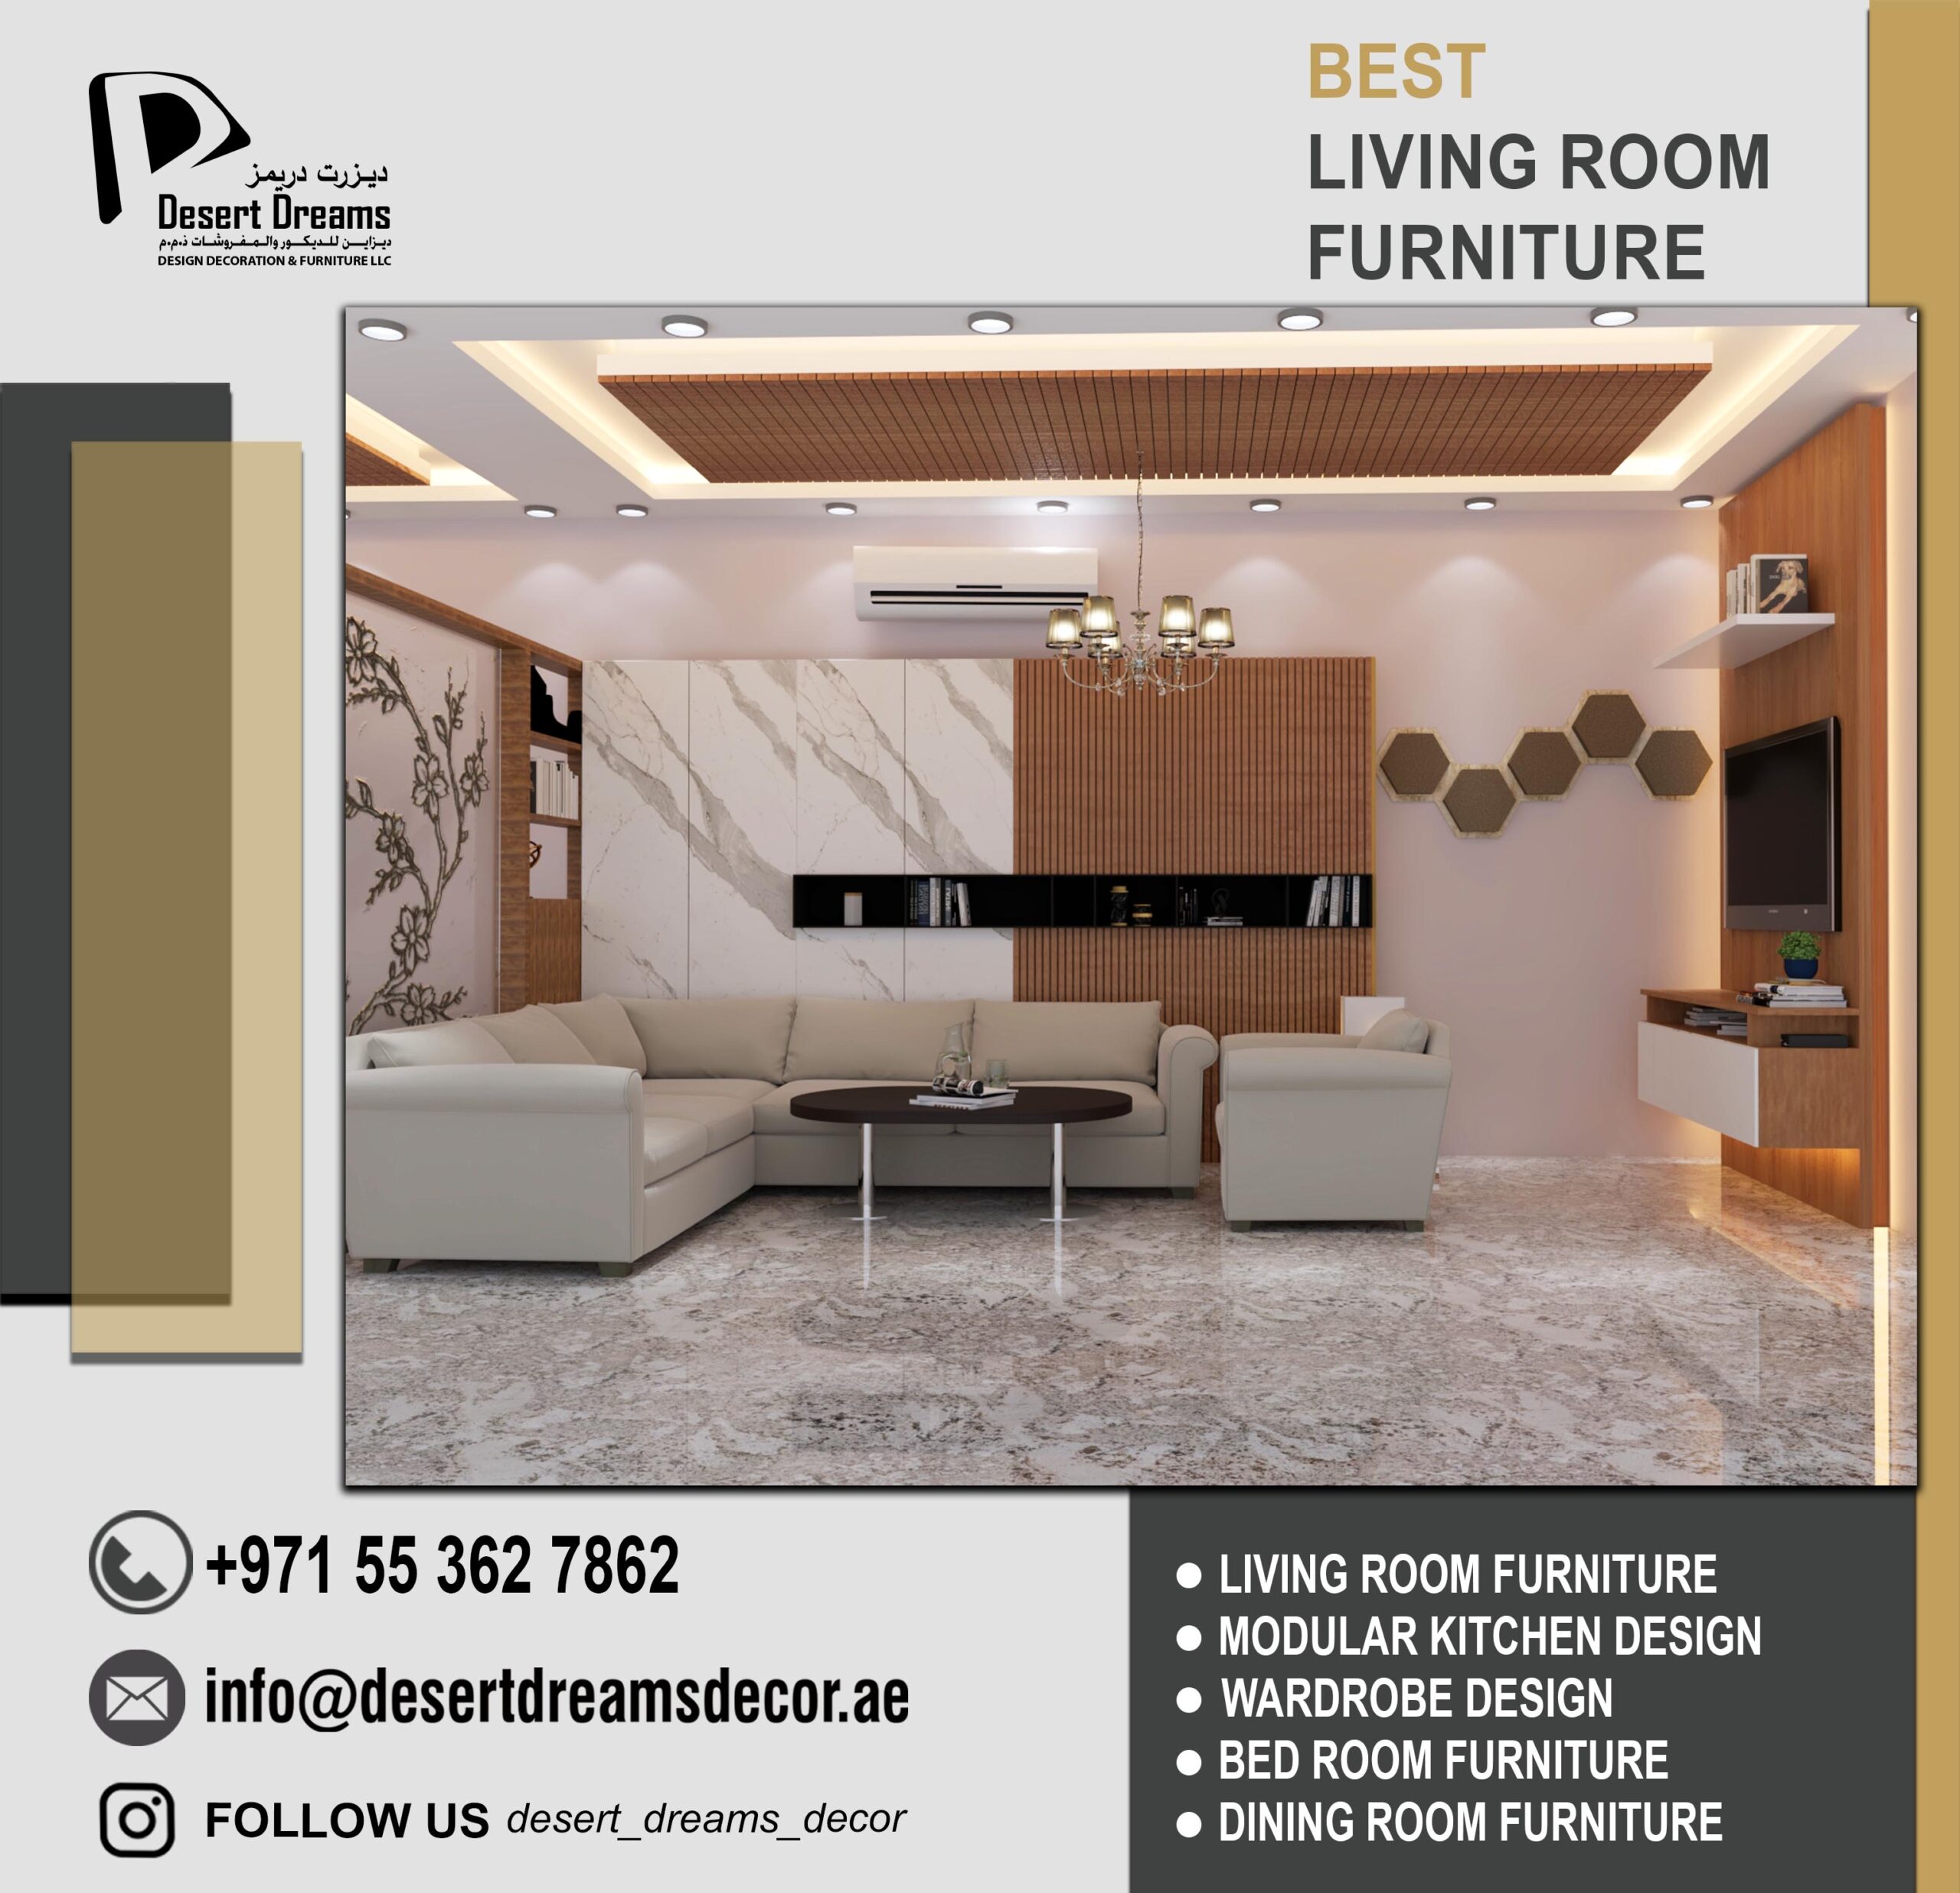 Custom Wooden Furniture in Uae | Fit -Out | Renovation | Ceiling.